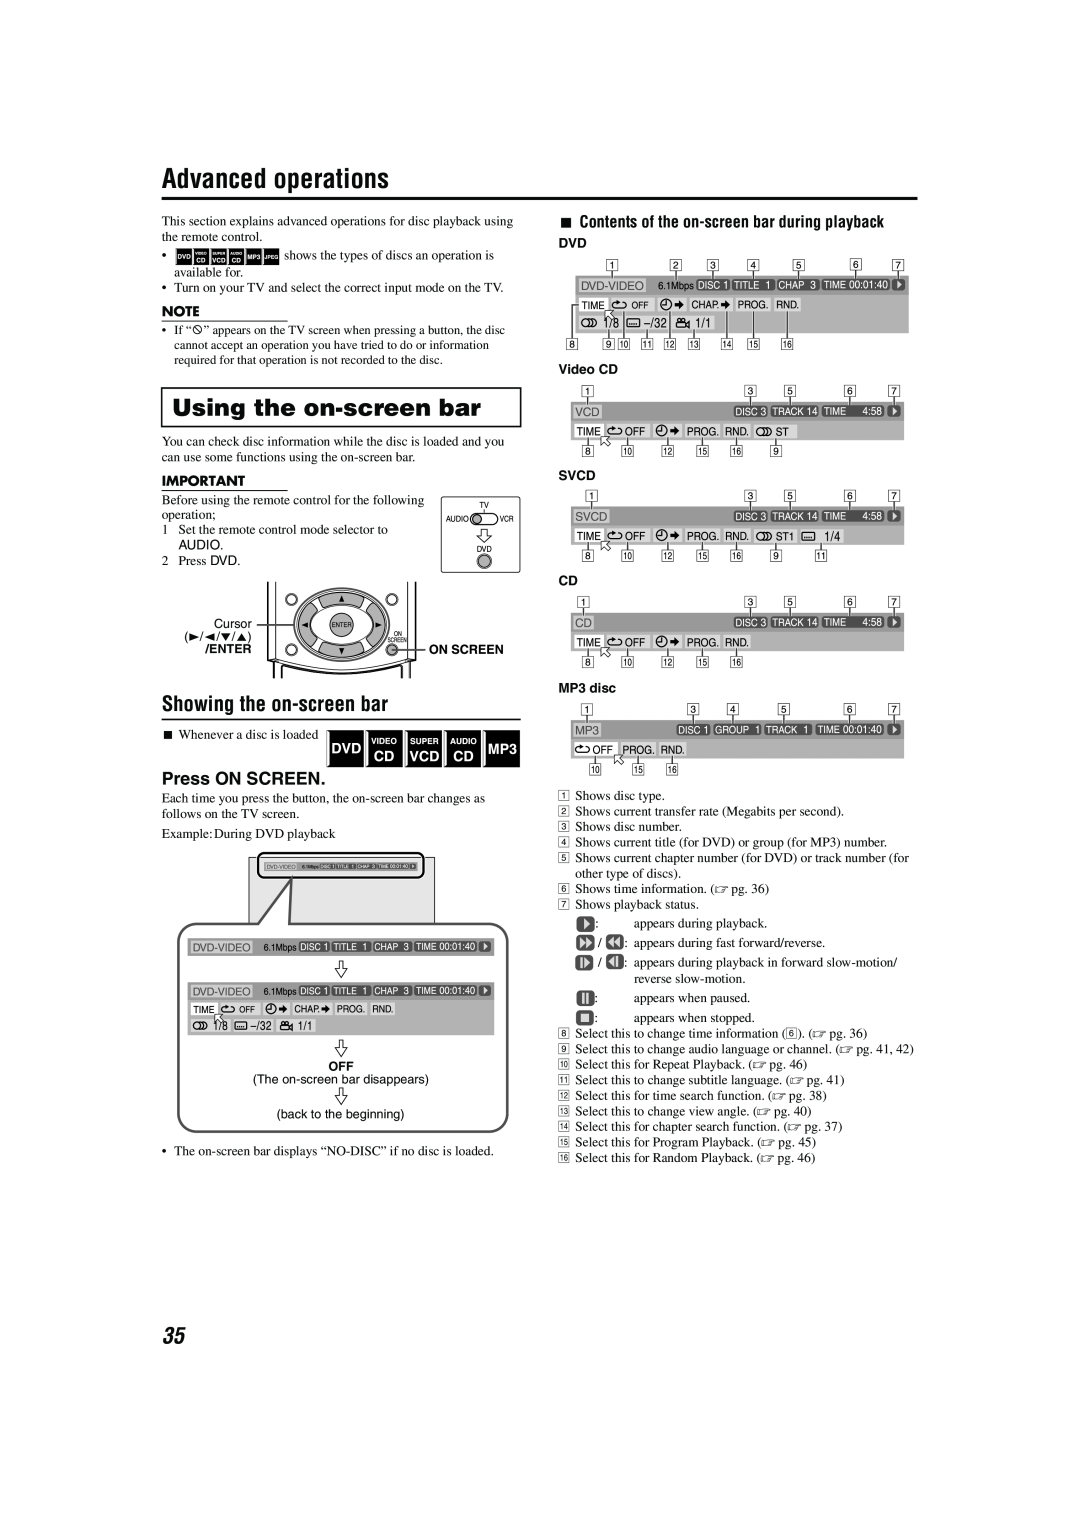 JVC M45 manual Advanced operations, Using the on-screenbar, Showing the on-screenbar, Press ON SCREEN 